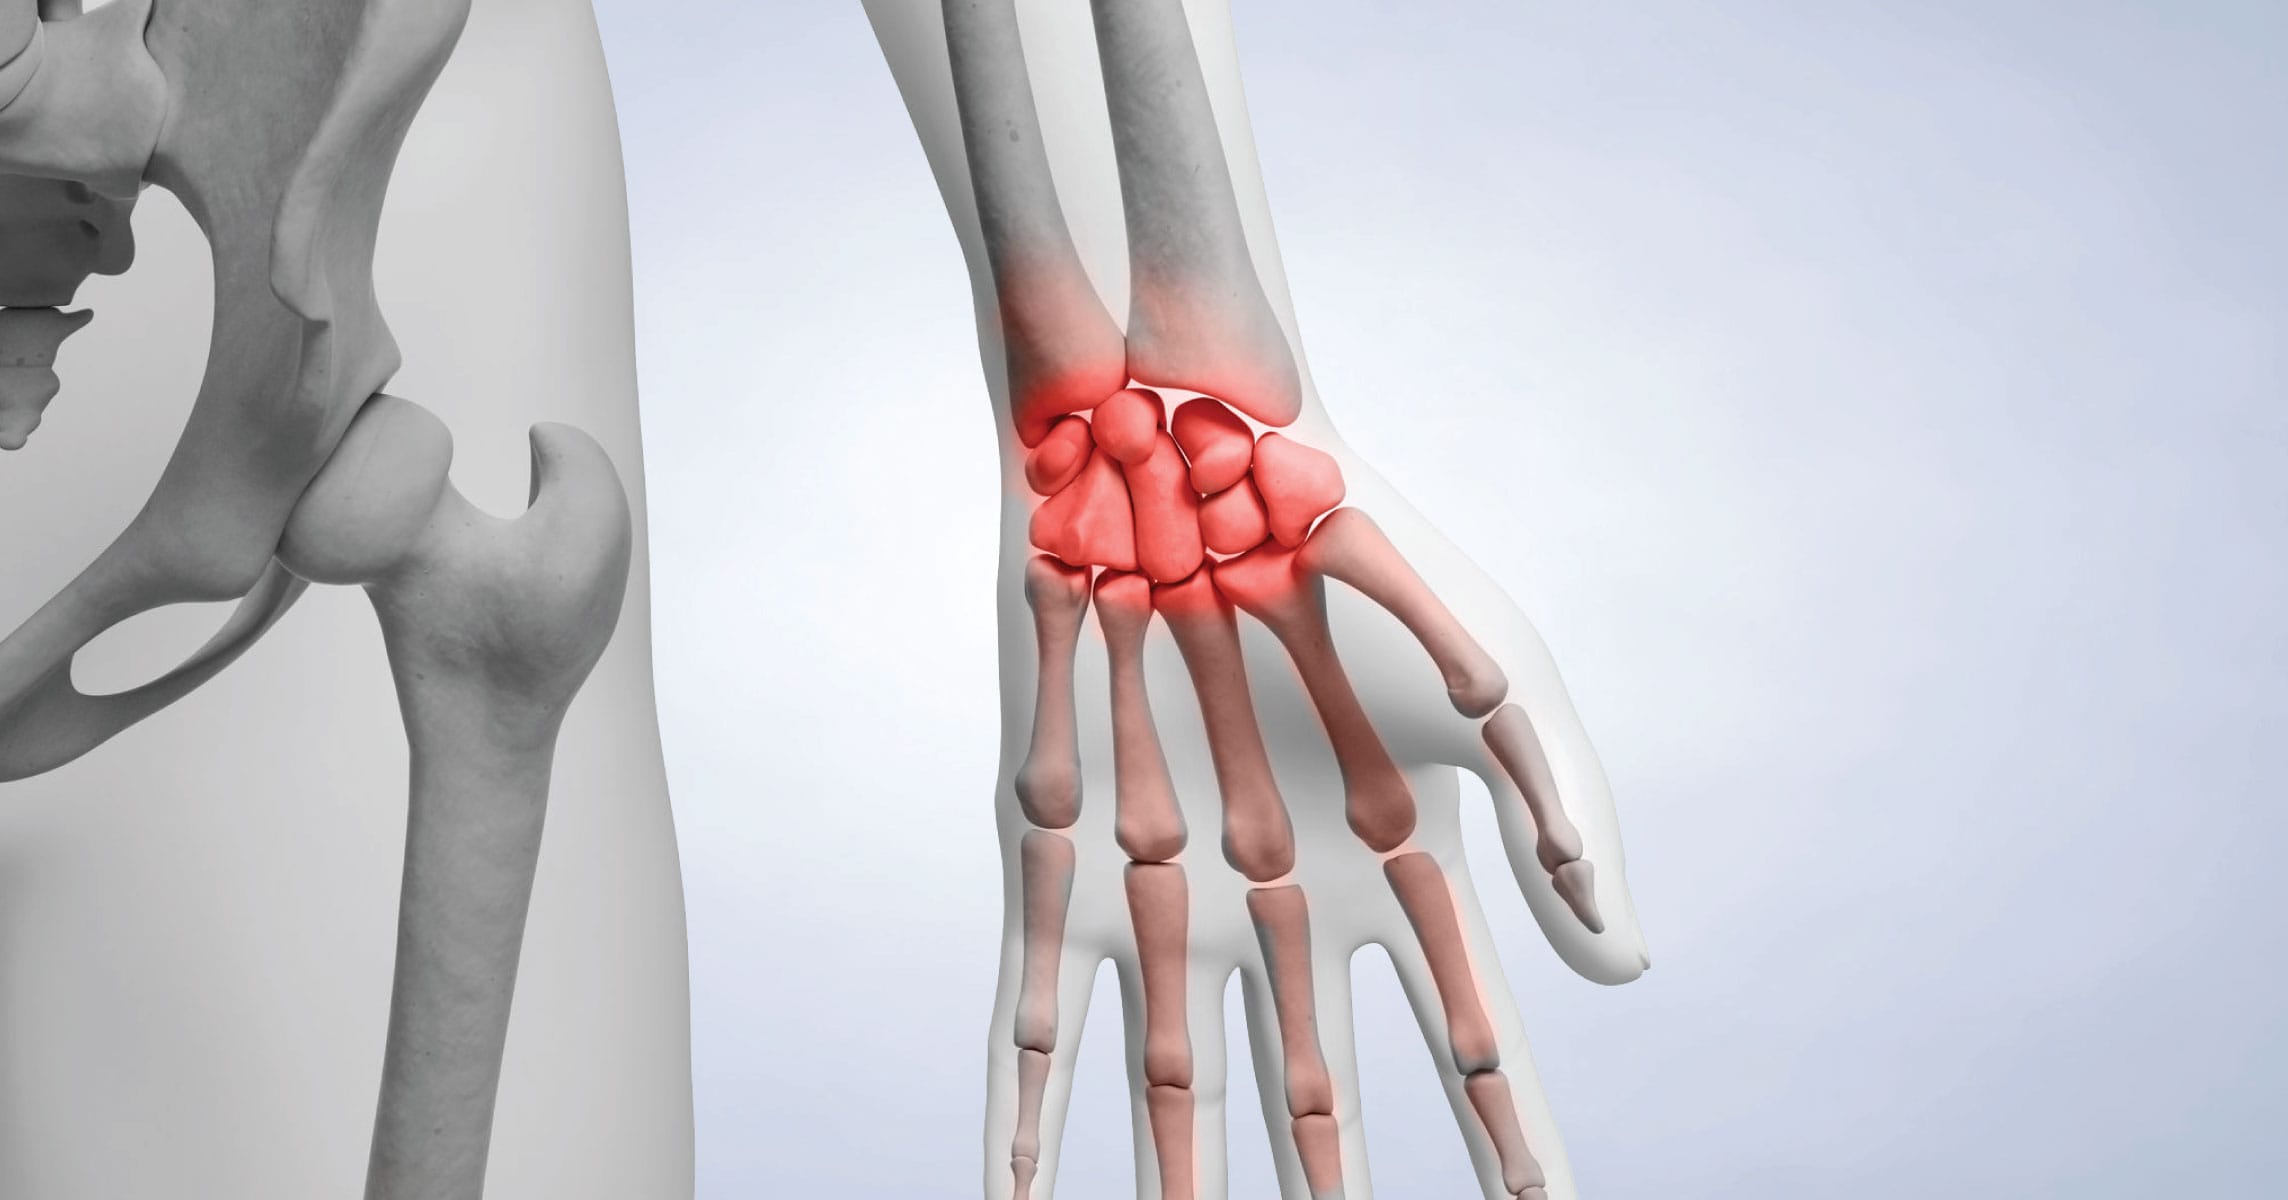 When carpal tunnel symptoms don’t respond to nonsurgical treatment, you may...